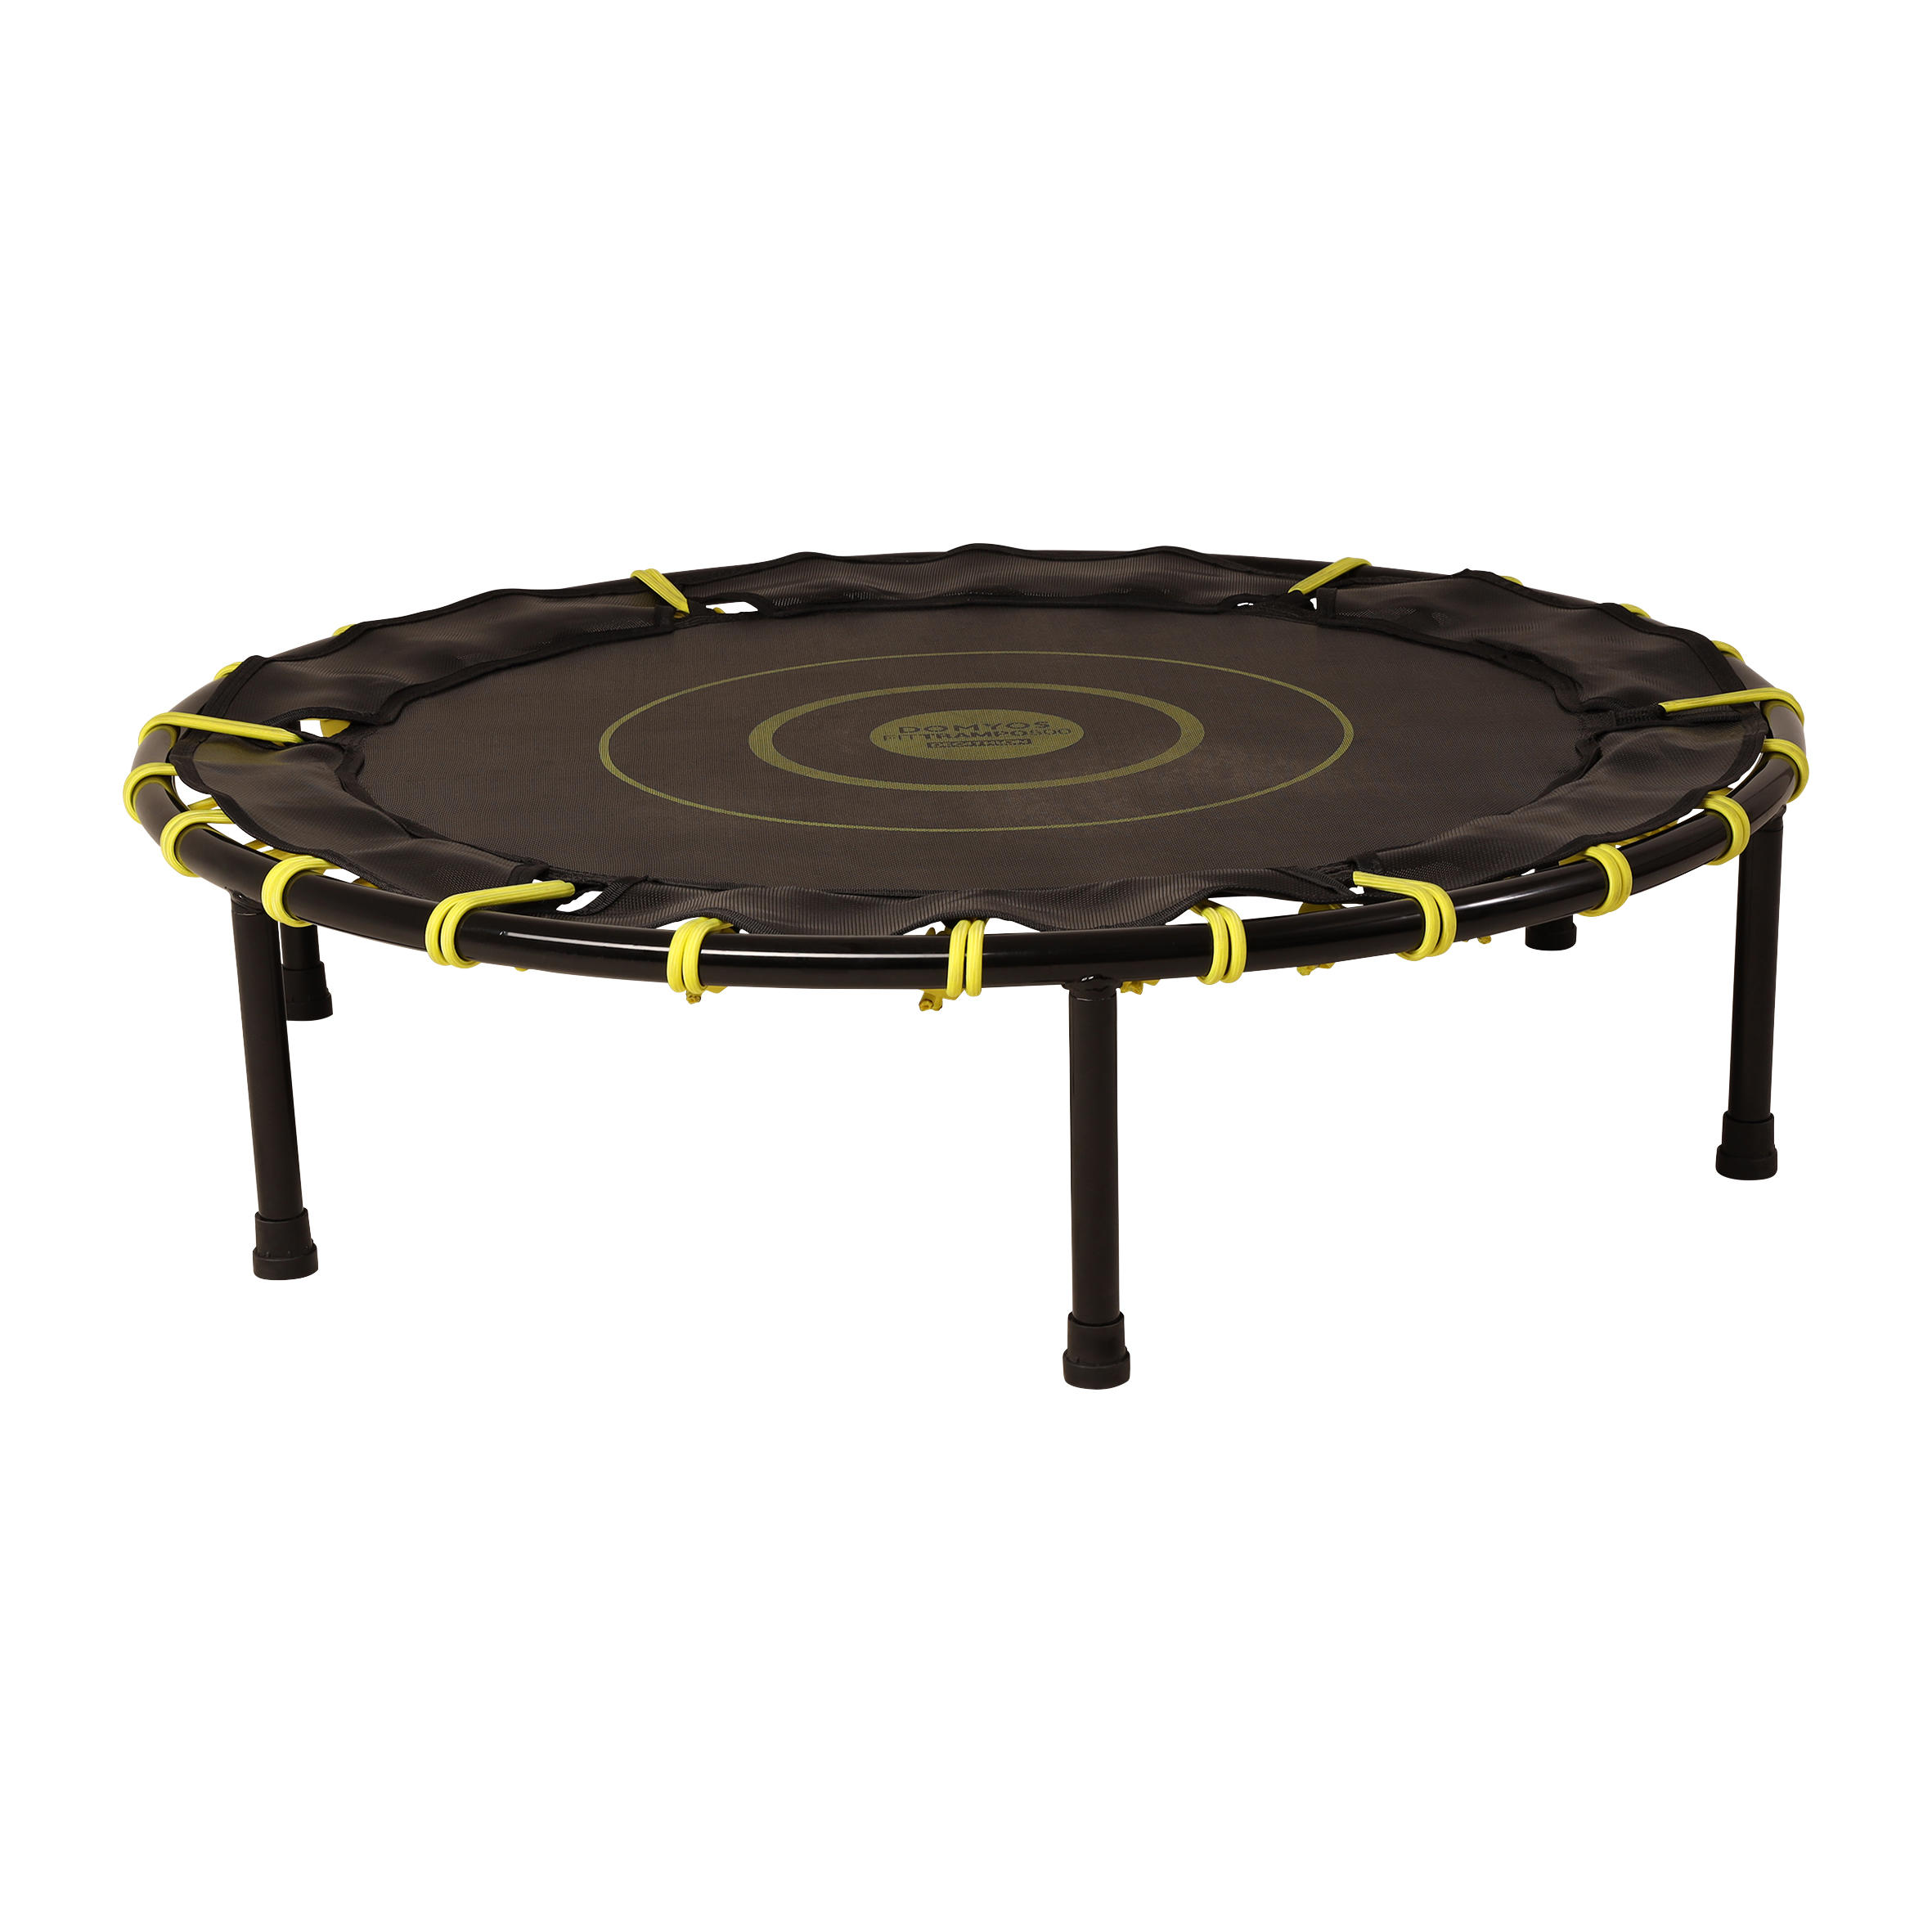 comes with user manual Ultrasport Trampoline Jumper 96 cm secure footing with 6 legs can be used as a mini trampoline for kids or a fitness trampoline for adults for indoor and outdoor use 